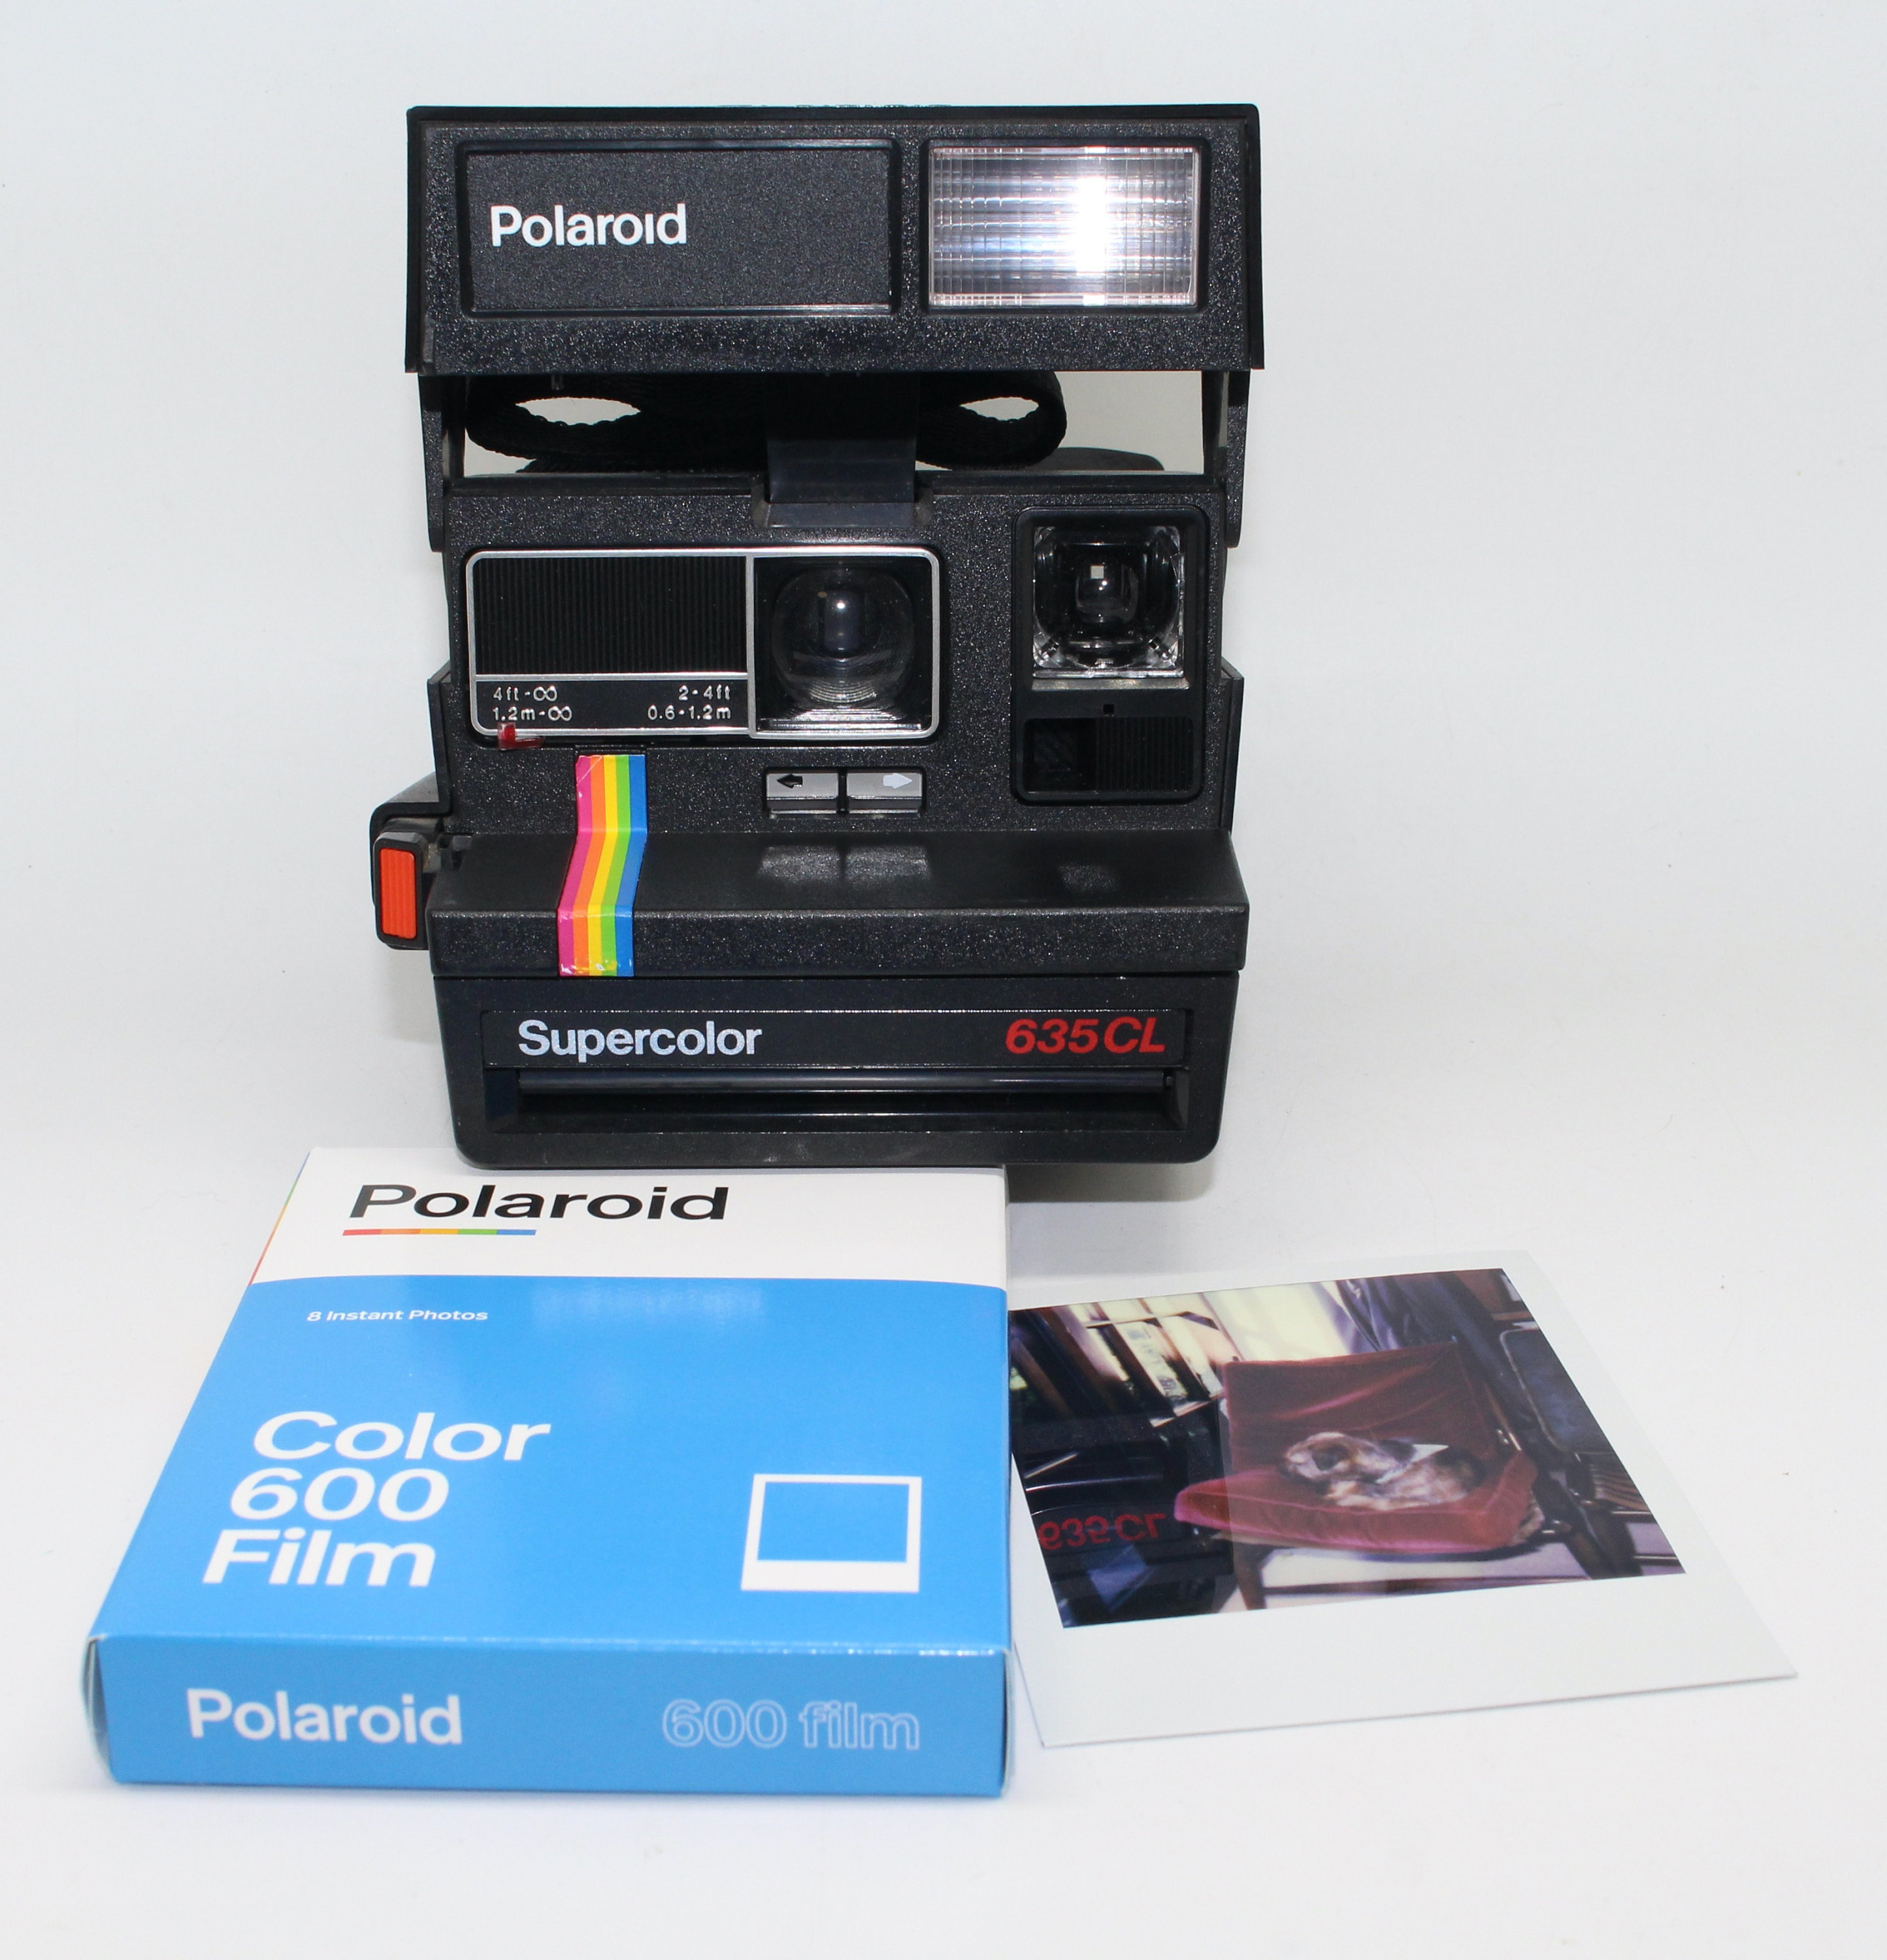 Polaroid Supercolor 635CL Instant Camera with brand-new - Etsy 日本